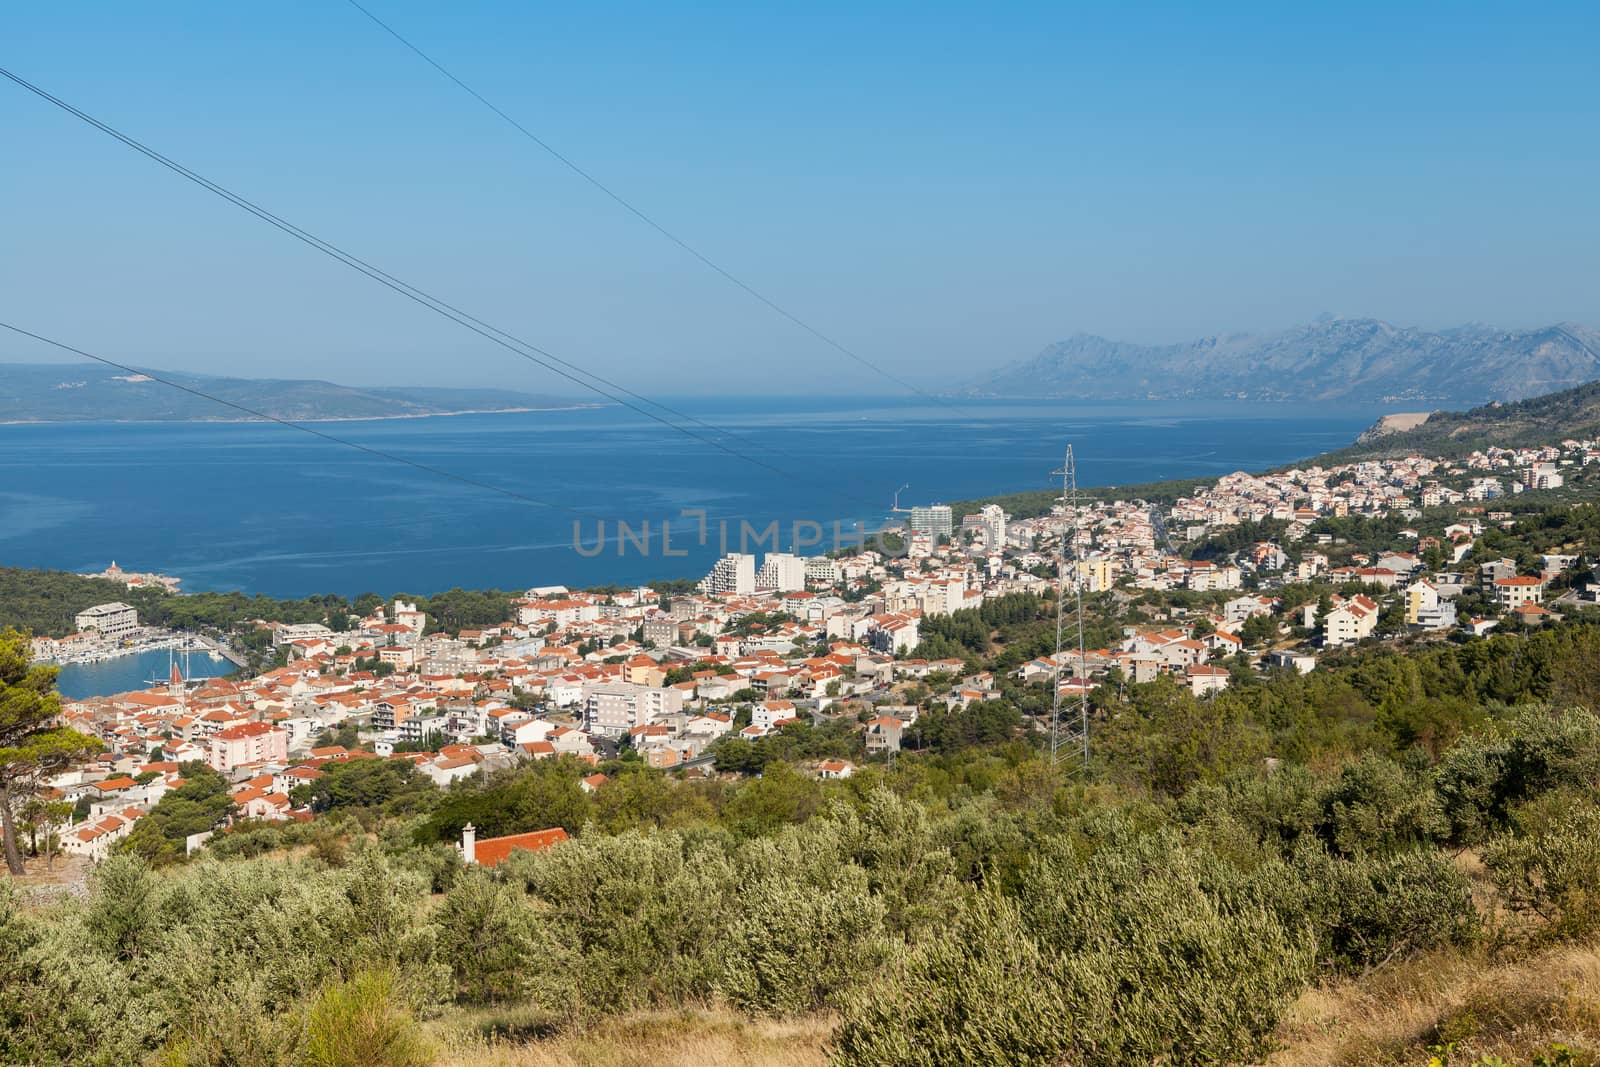 Distant view at the city of Makarska, popular touristic resort situated between Biokovo Mountains and Adriatic Sea in southern Croatia.